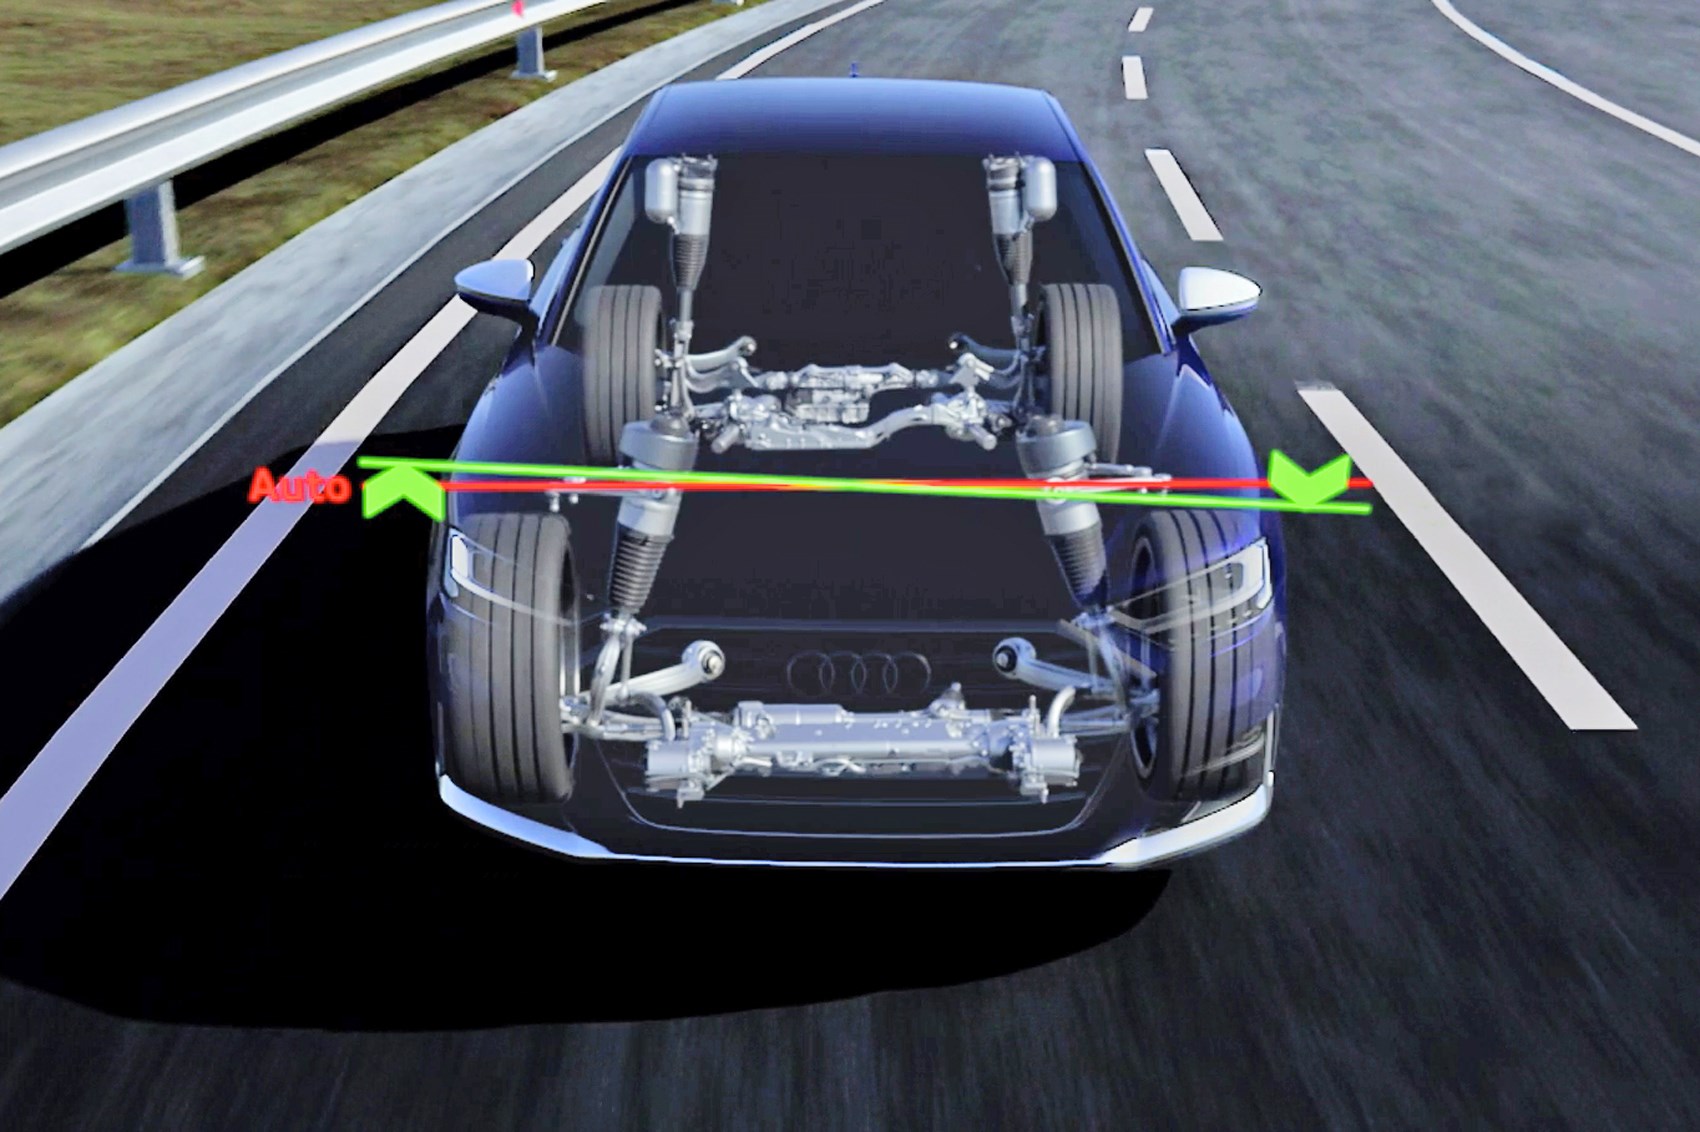 Examples of electromagnetic active suspension systems. (a) Audi